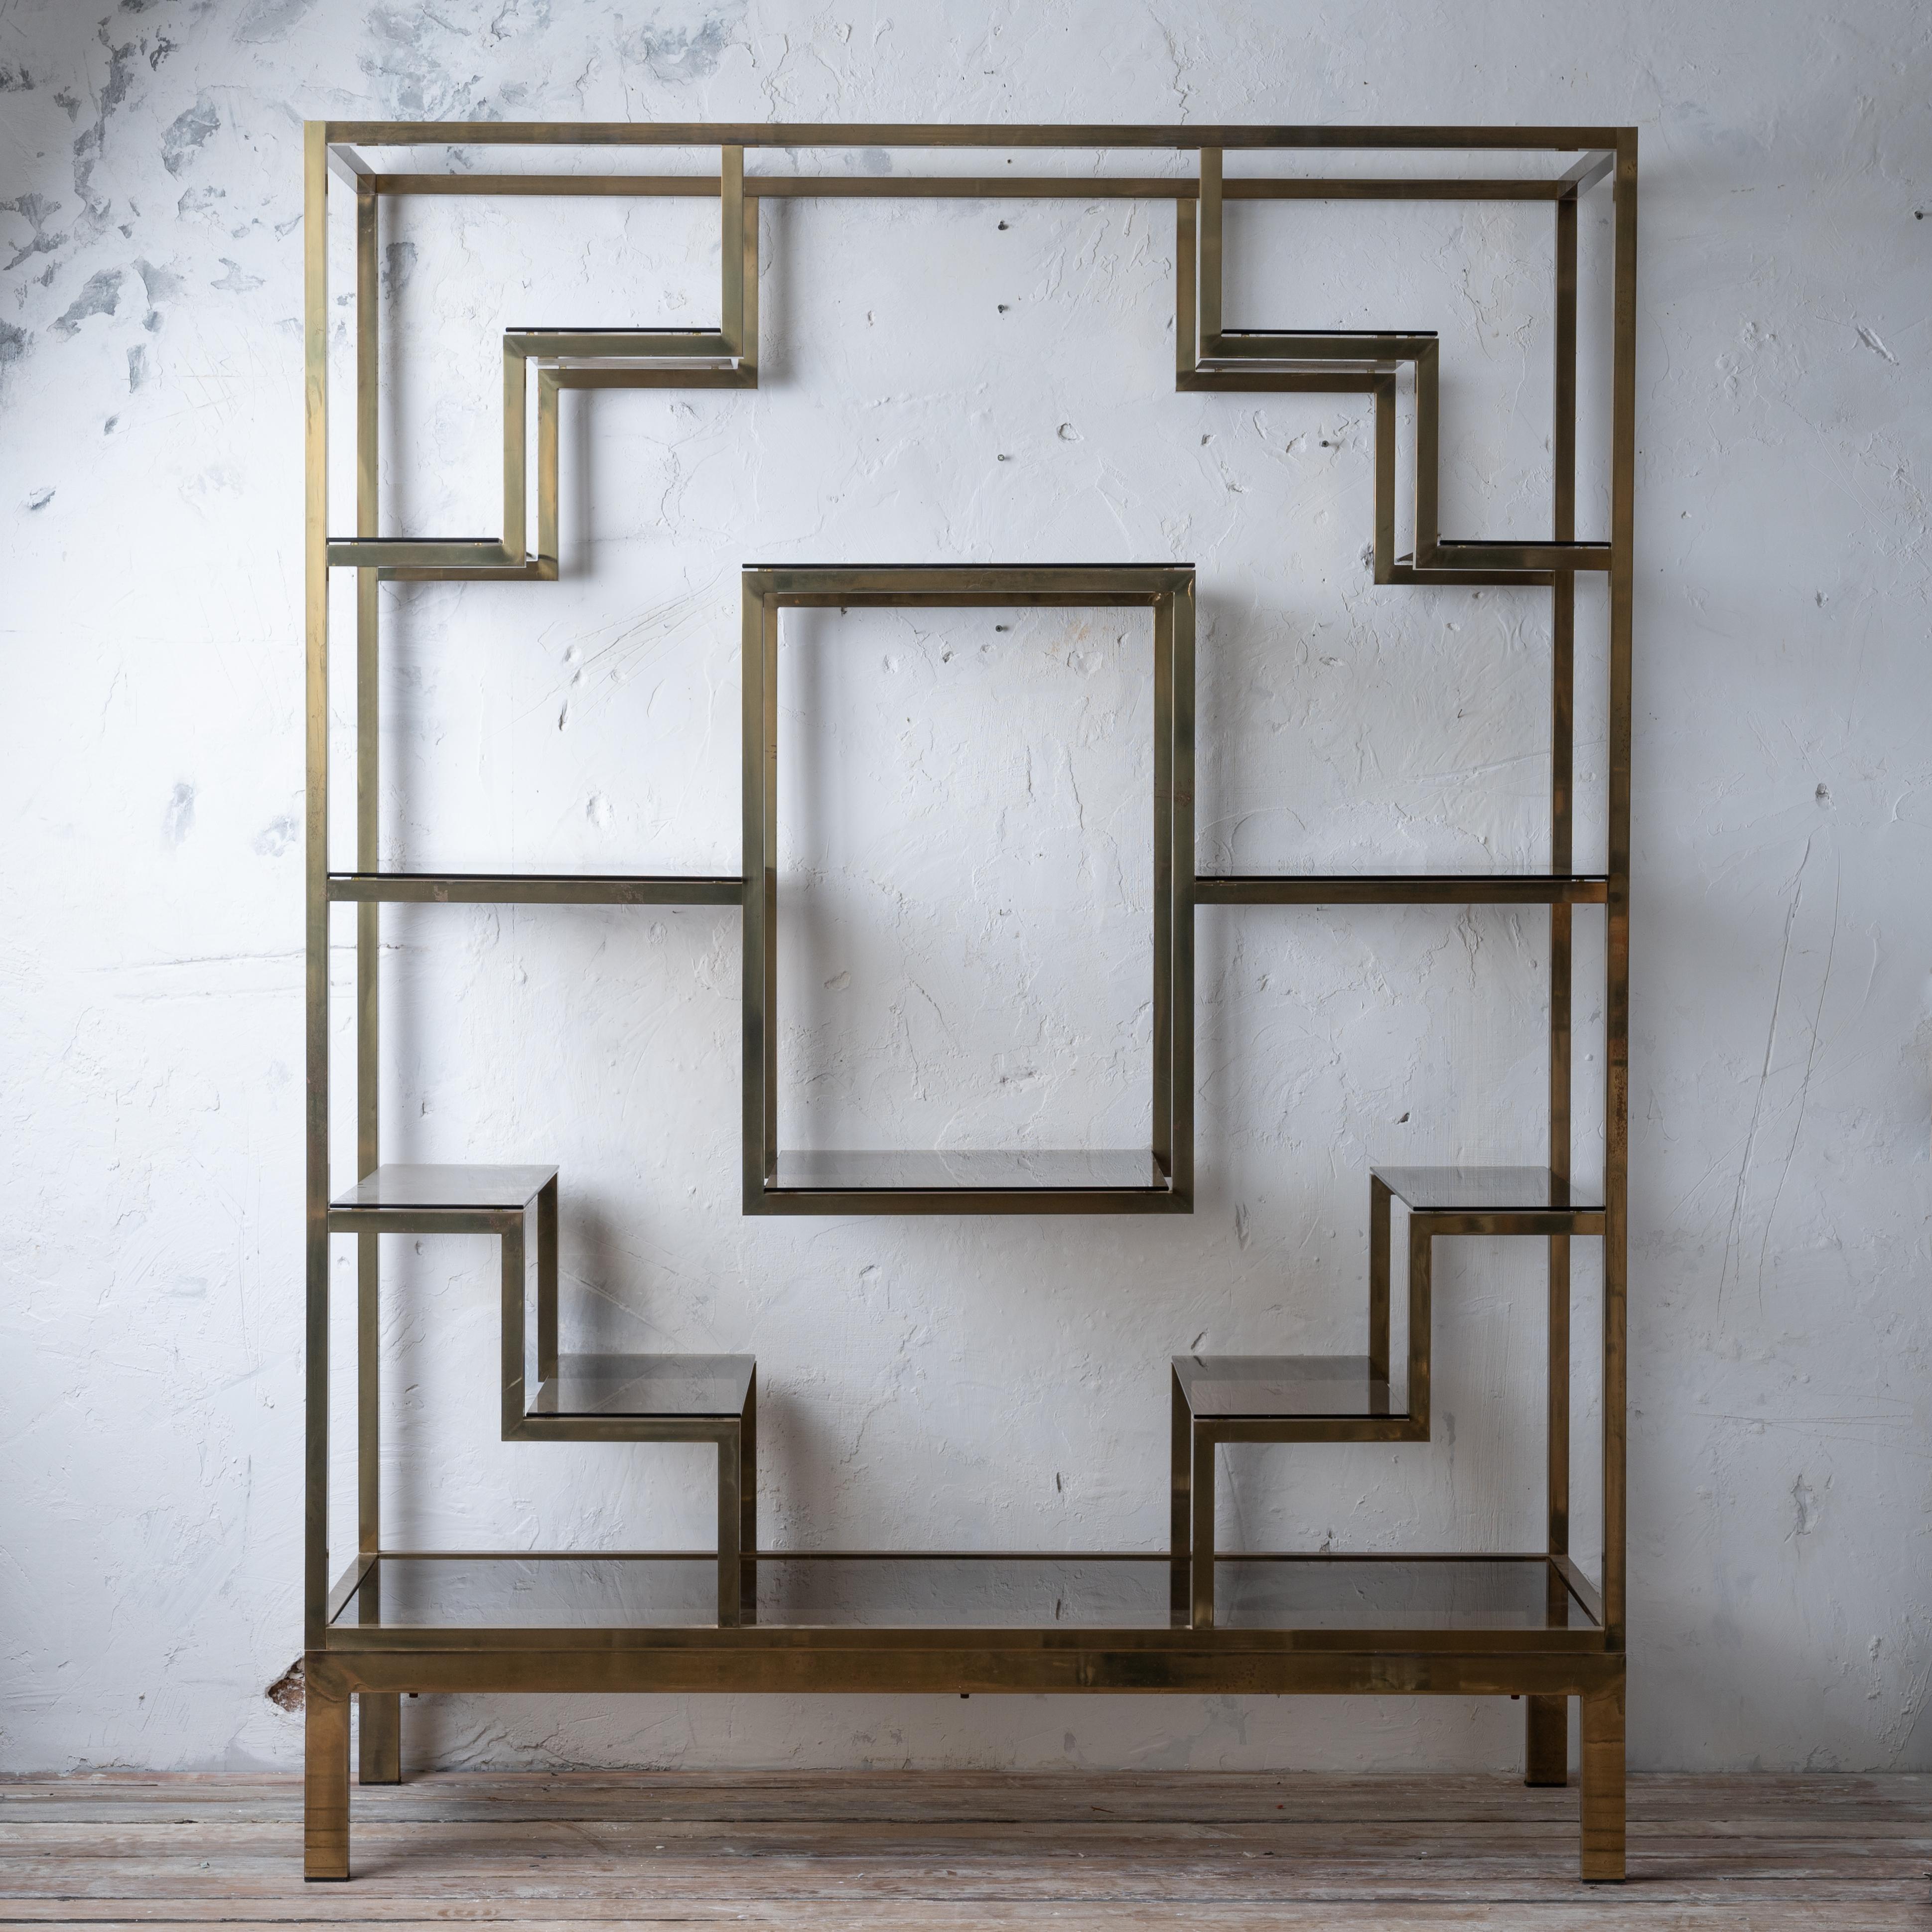 An Italian brass and smoked glass etagère by Romeo Rega, circa 1970. 

59 ¾ inches wide by 19 ¼ inches deep by 79 ½ inches tall

